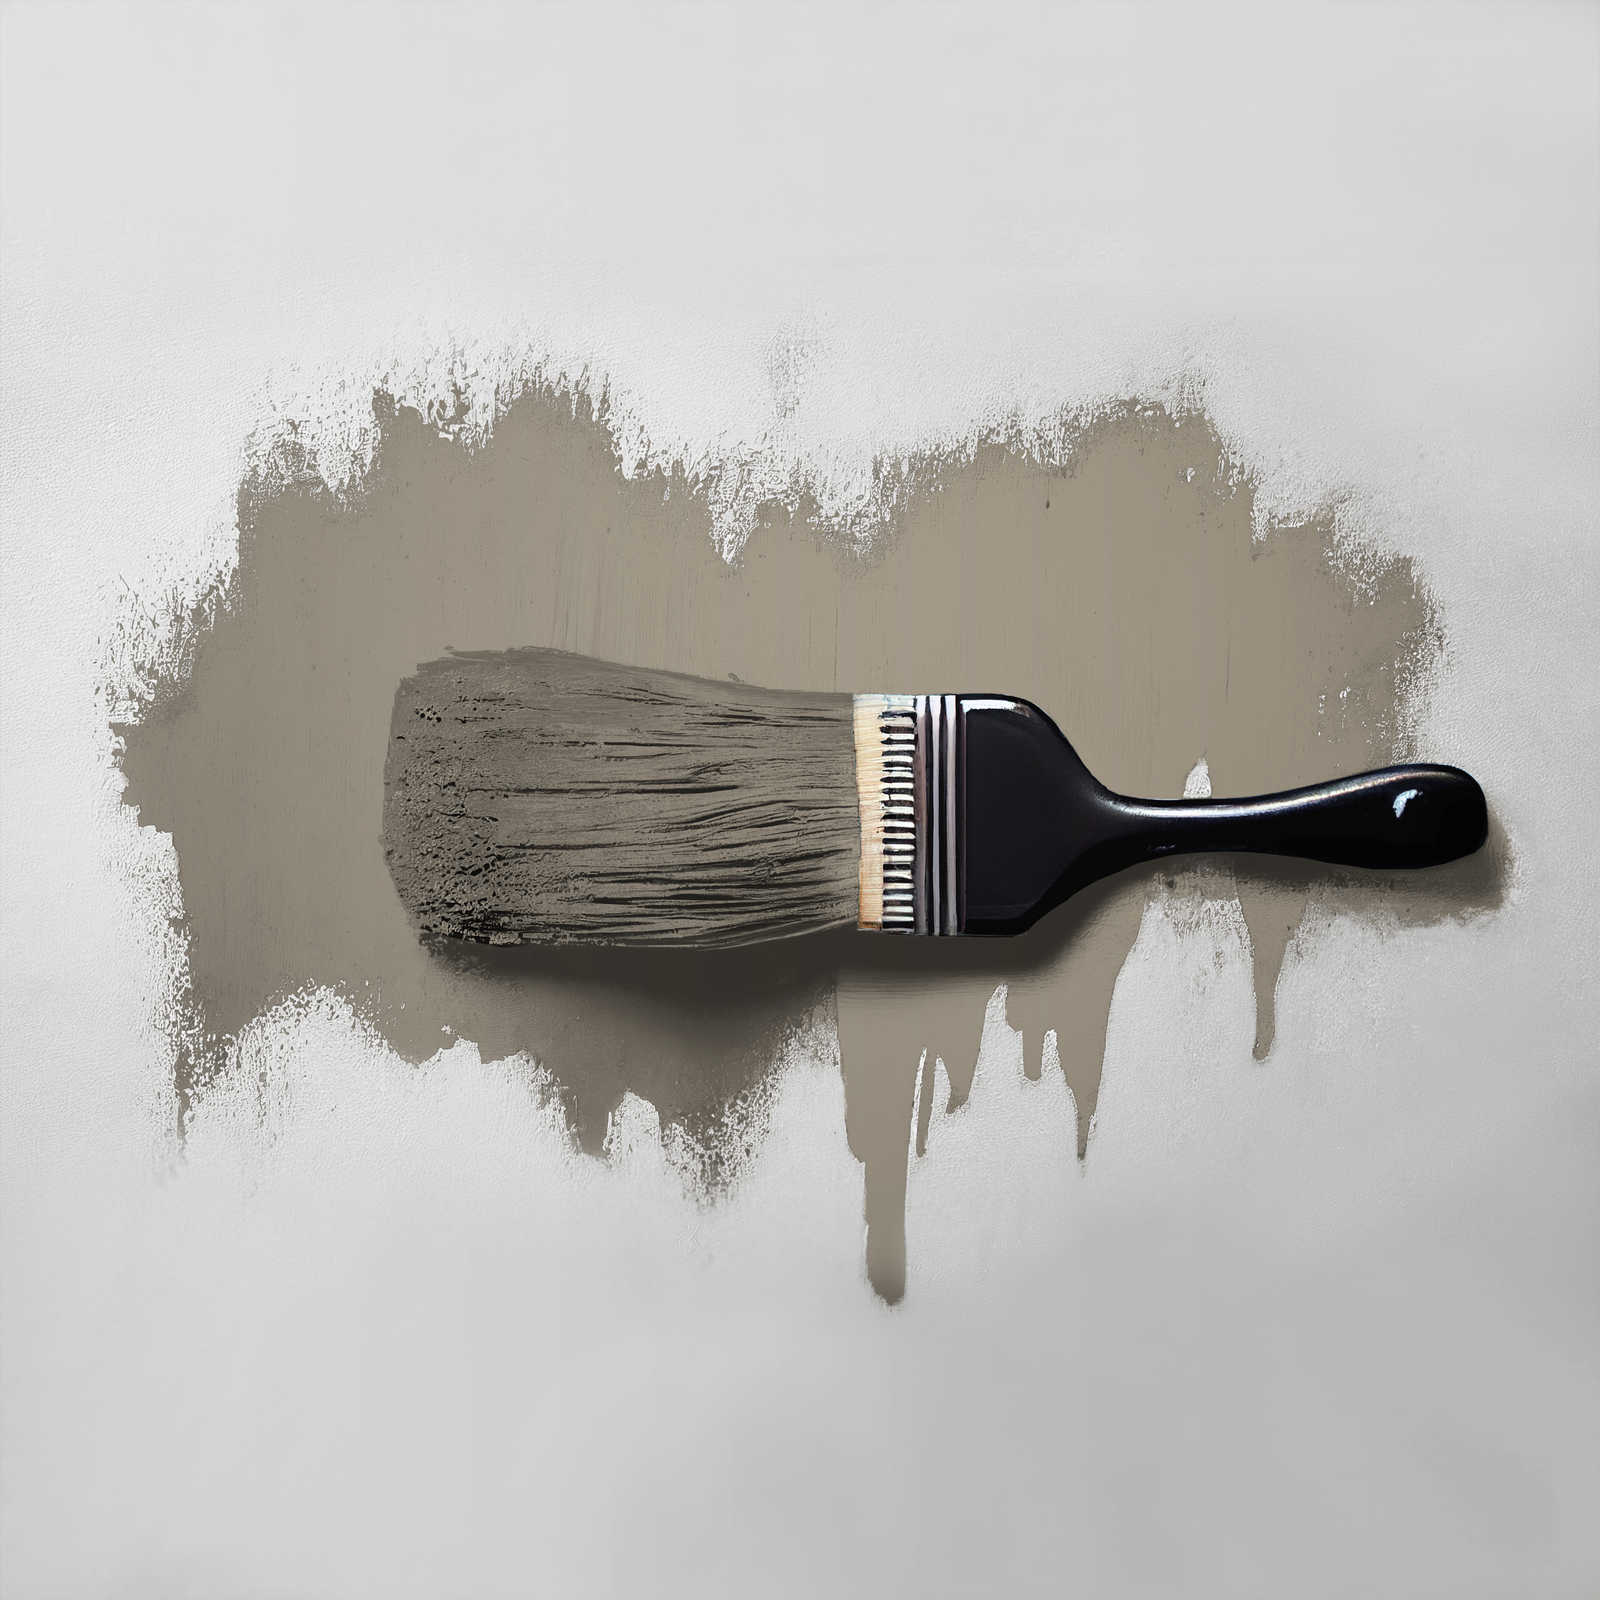             Wall Paint TCK1020 »Aesthetic Ajwain« in soothing taupe – 5.0 litre
        